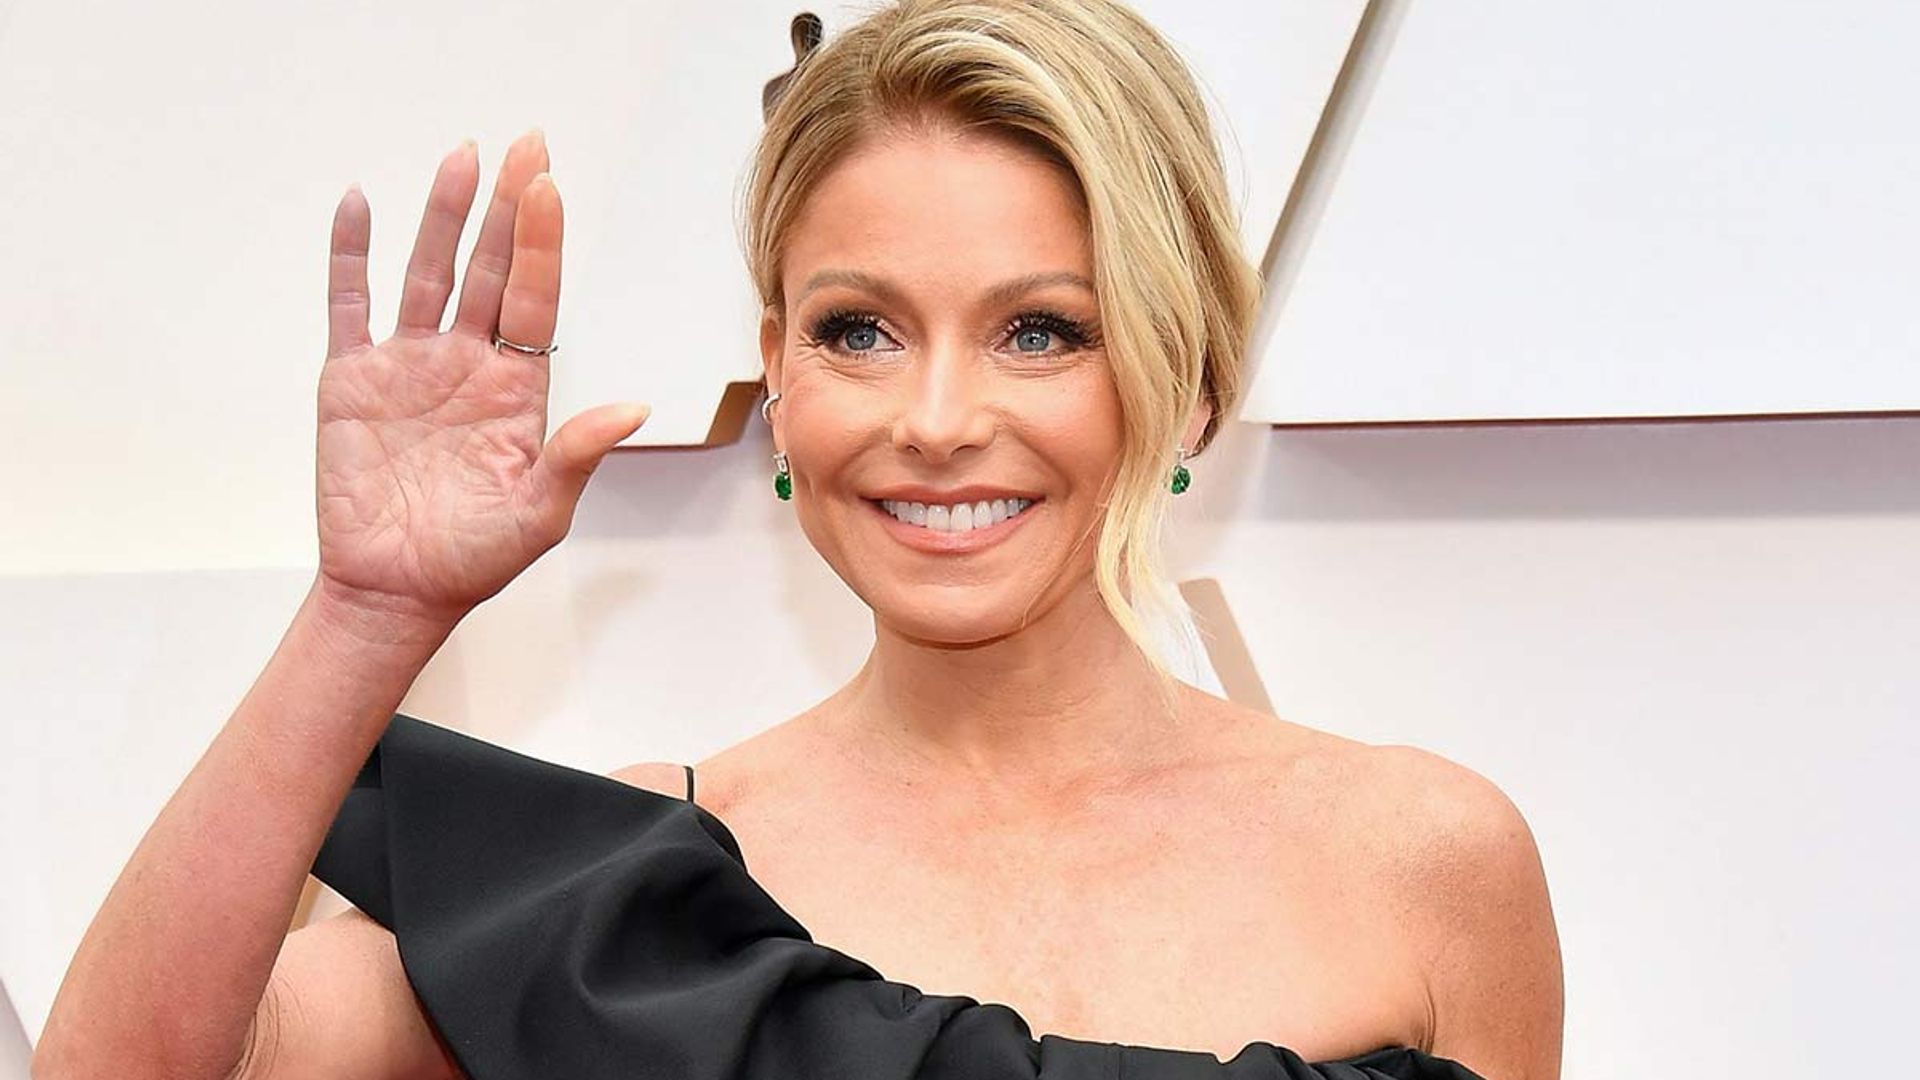 Kelly Ripa kept things fun with her look at Daytime Emmy Awards